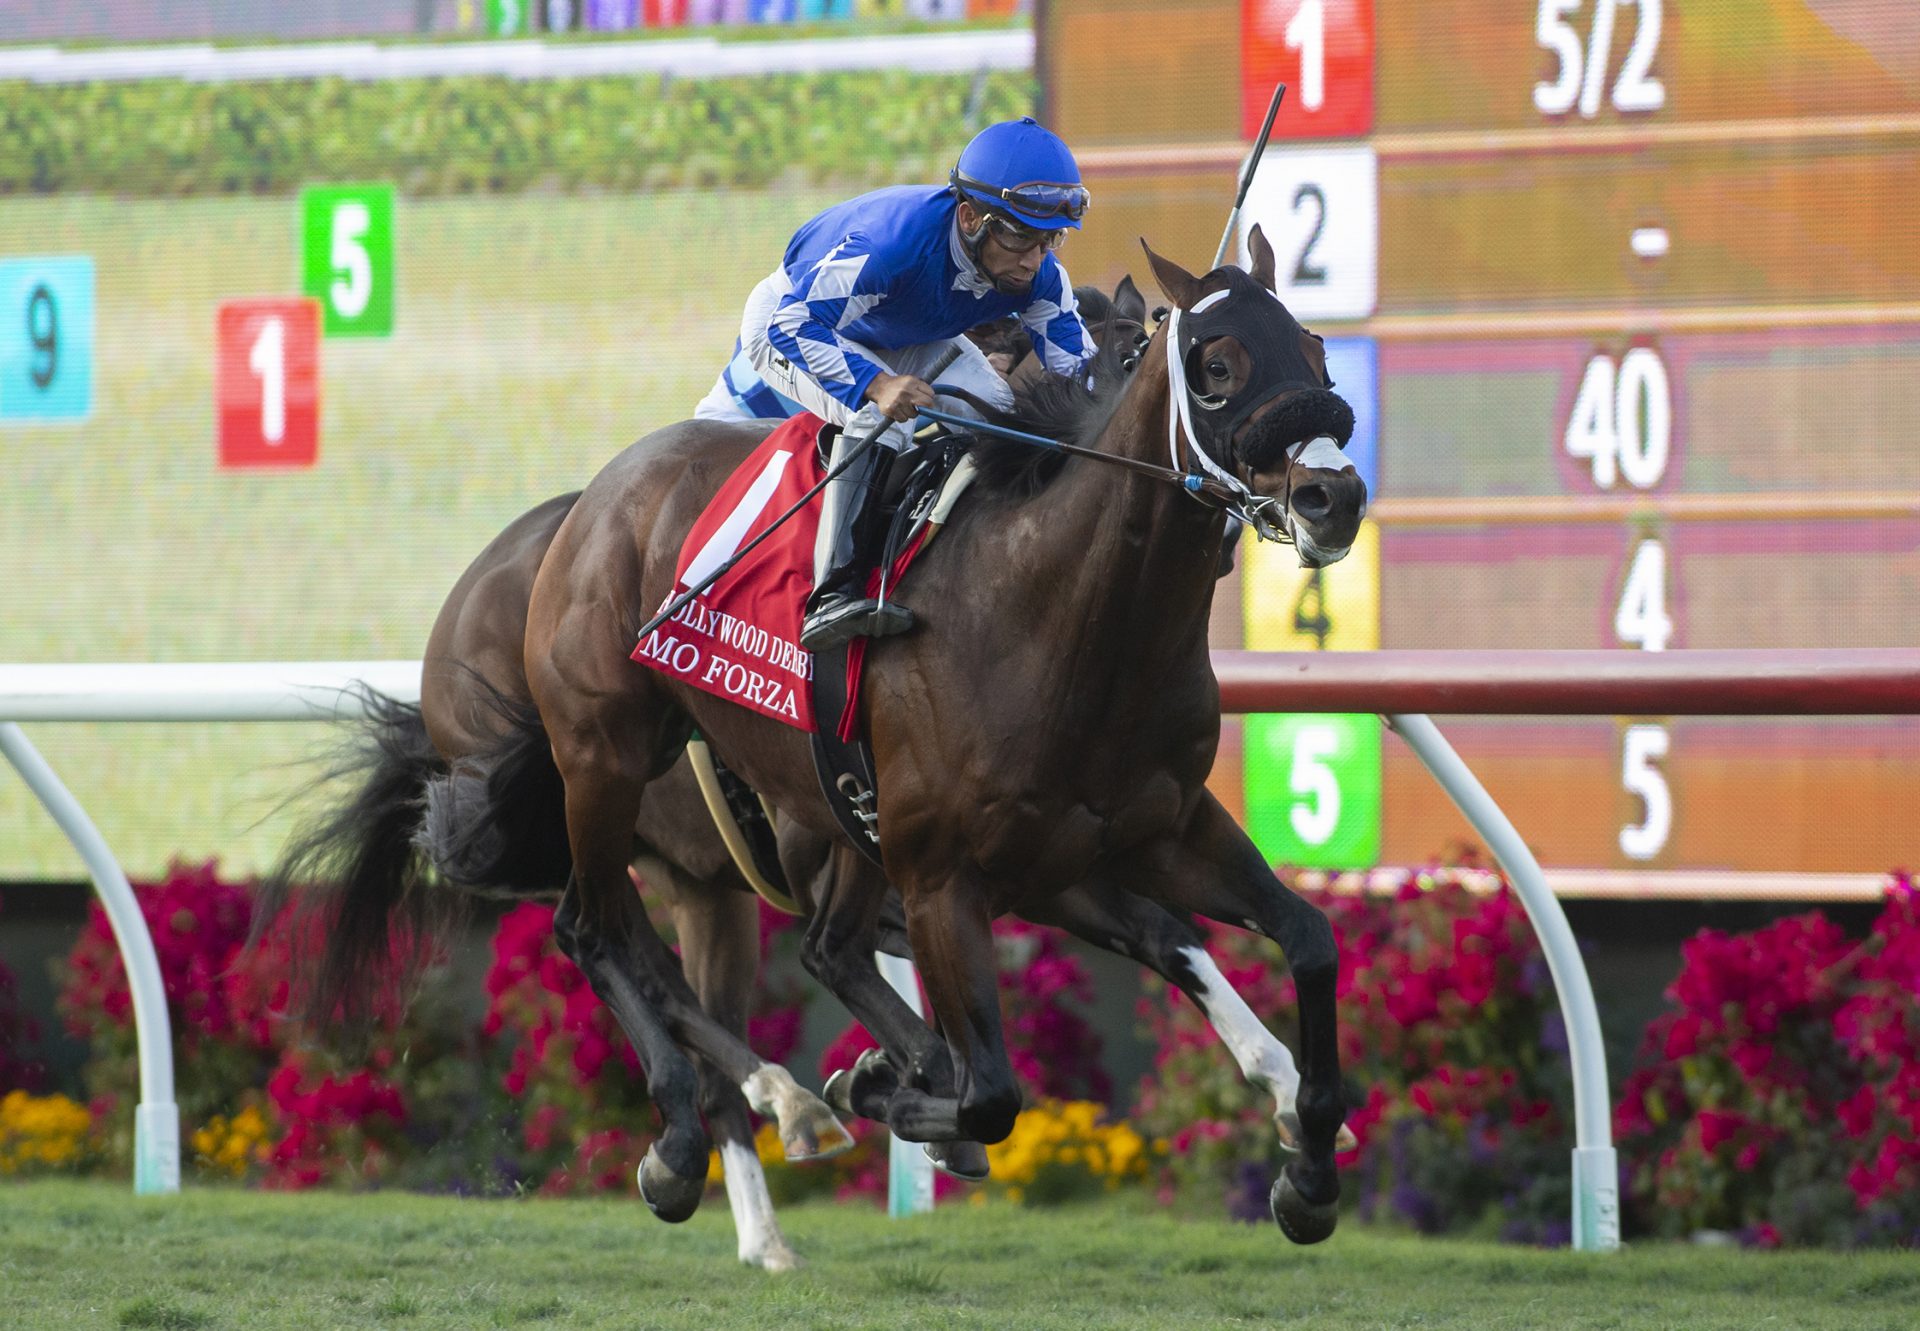 Mo Forza (Uncle Mo) Winning G1 Hollywood Derby